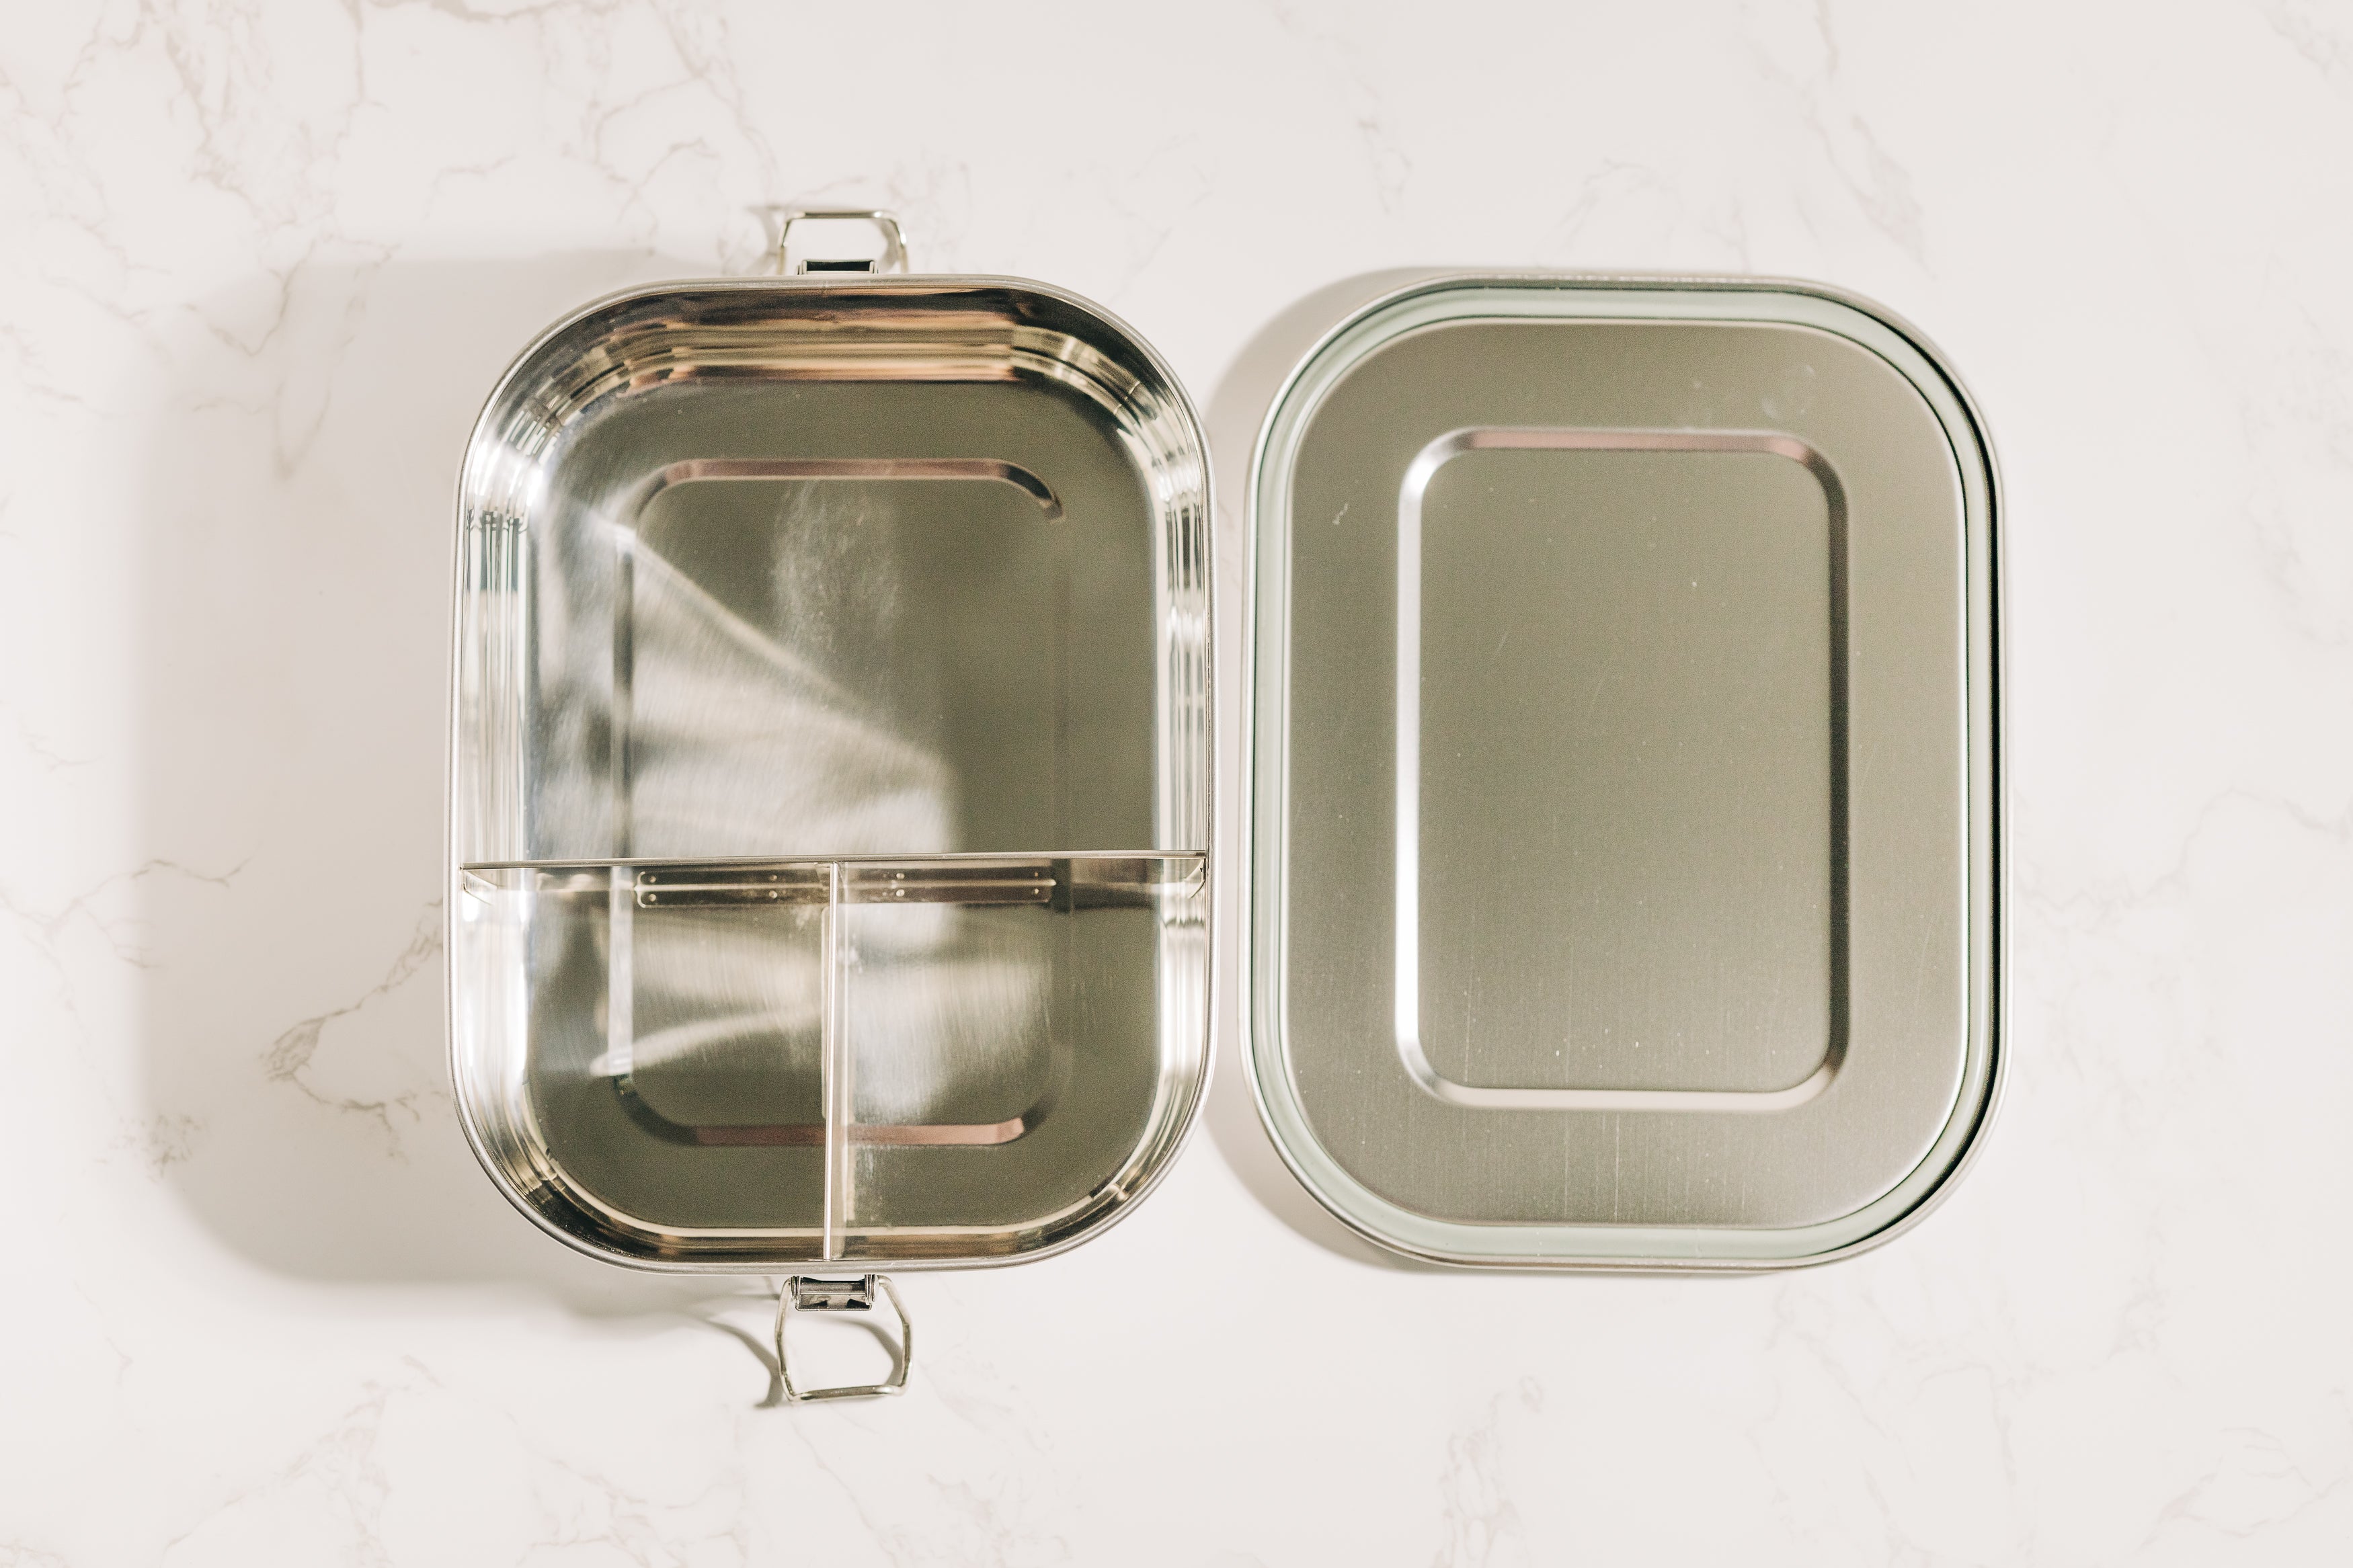 Stainless Steel Bento Style Lunchbox - 3 Compartments